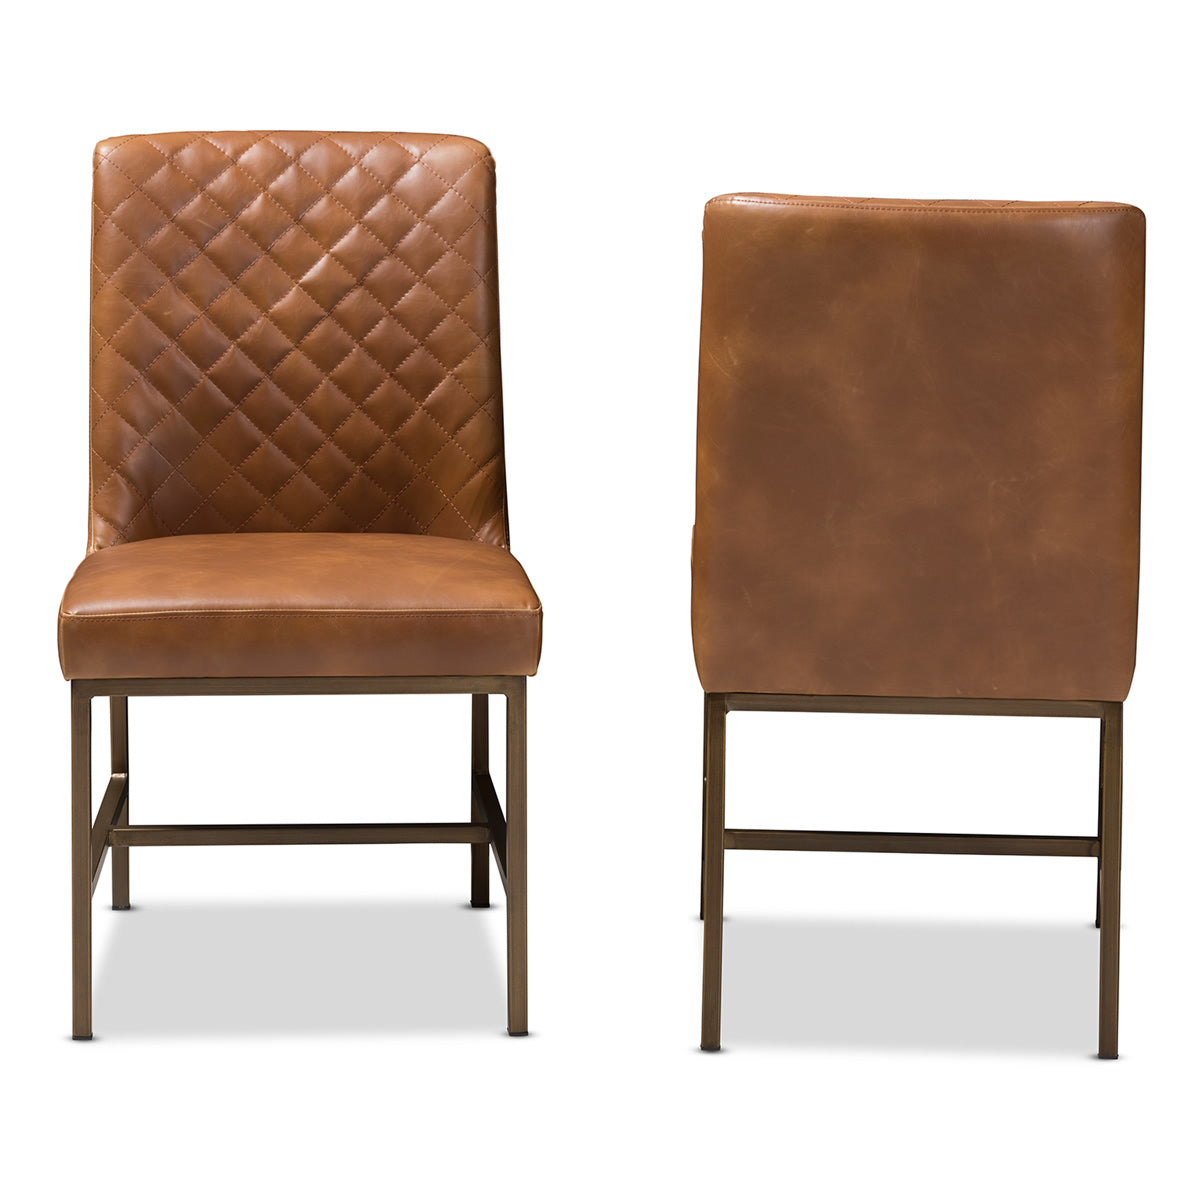 Baxton Studio Margaux Modern Luxe Light Brown Faux Leather Upholstered Dining Chair (Set of 2) Baxton Studio-dining chair-Minimal And Modern - 2